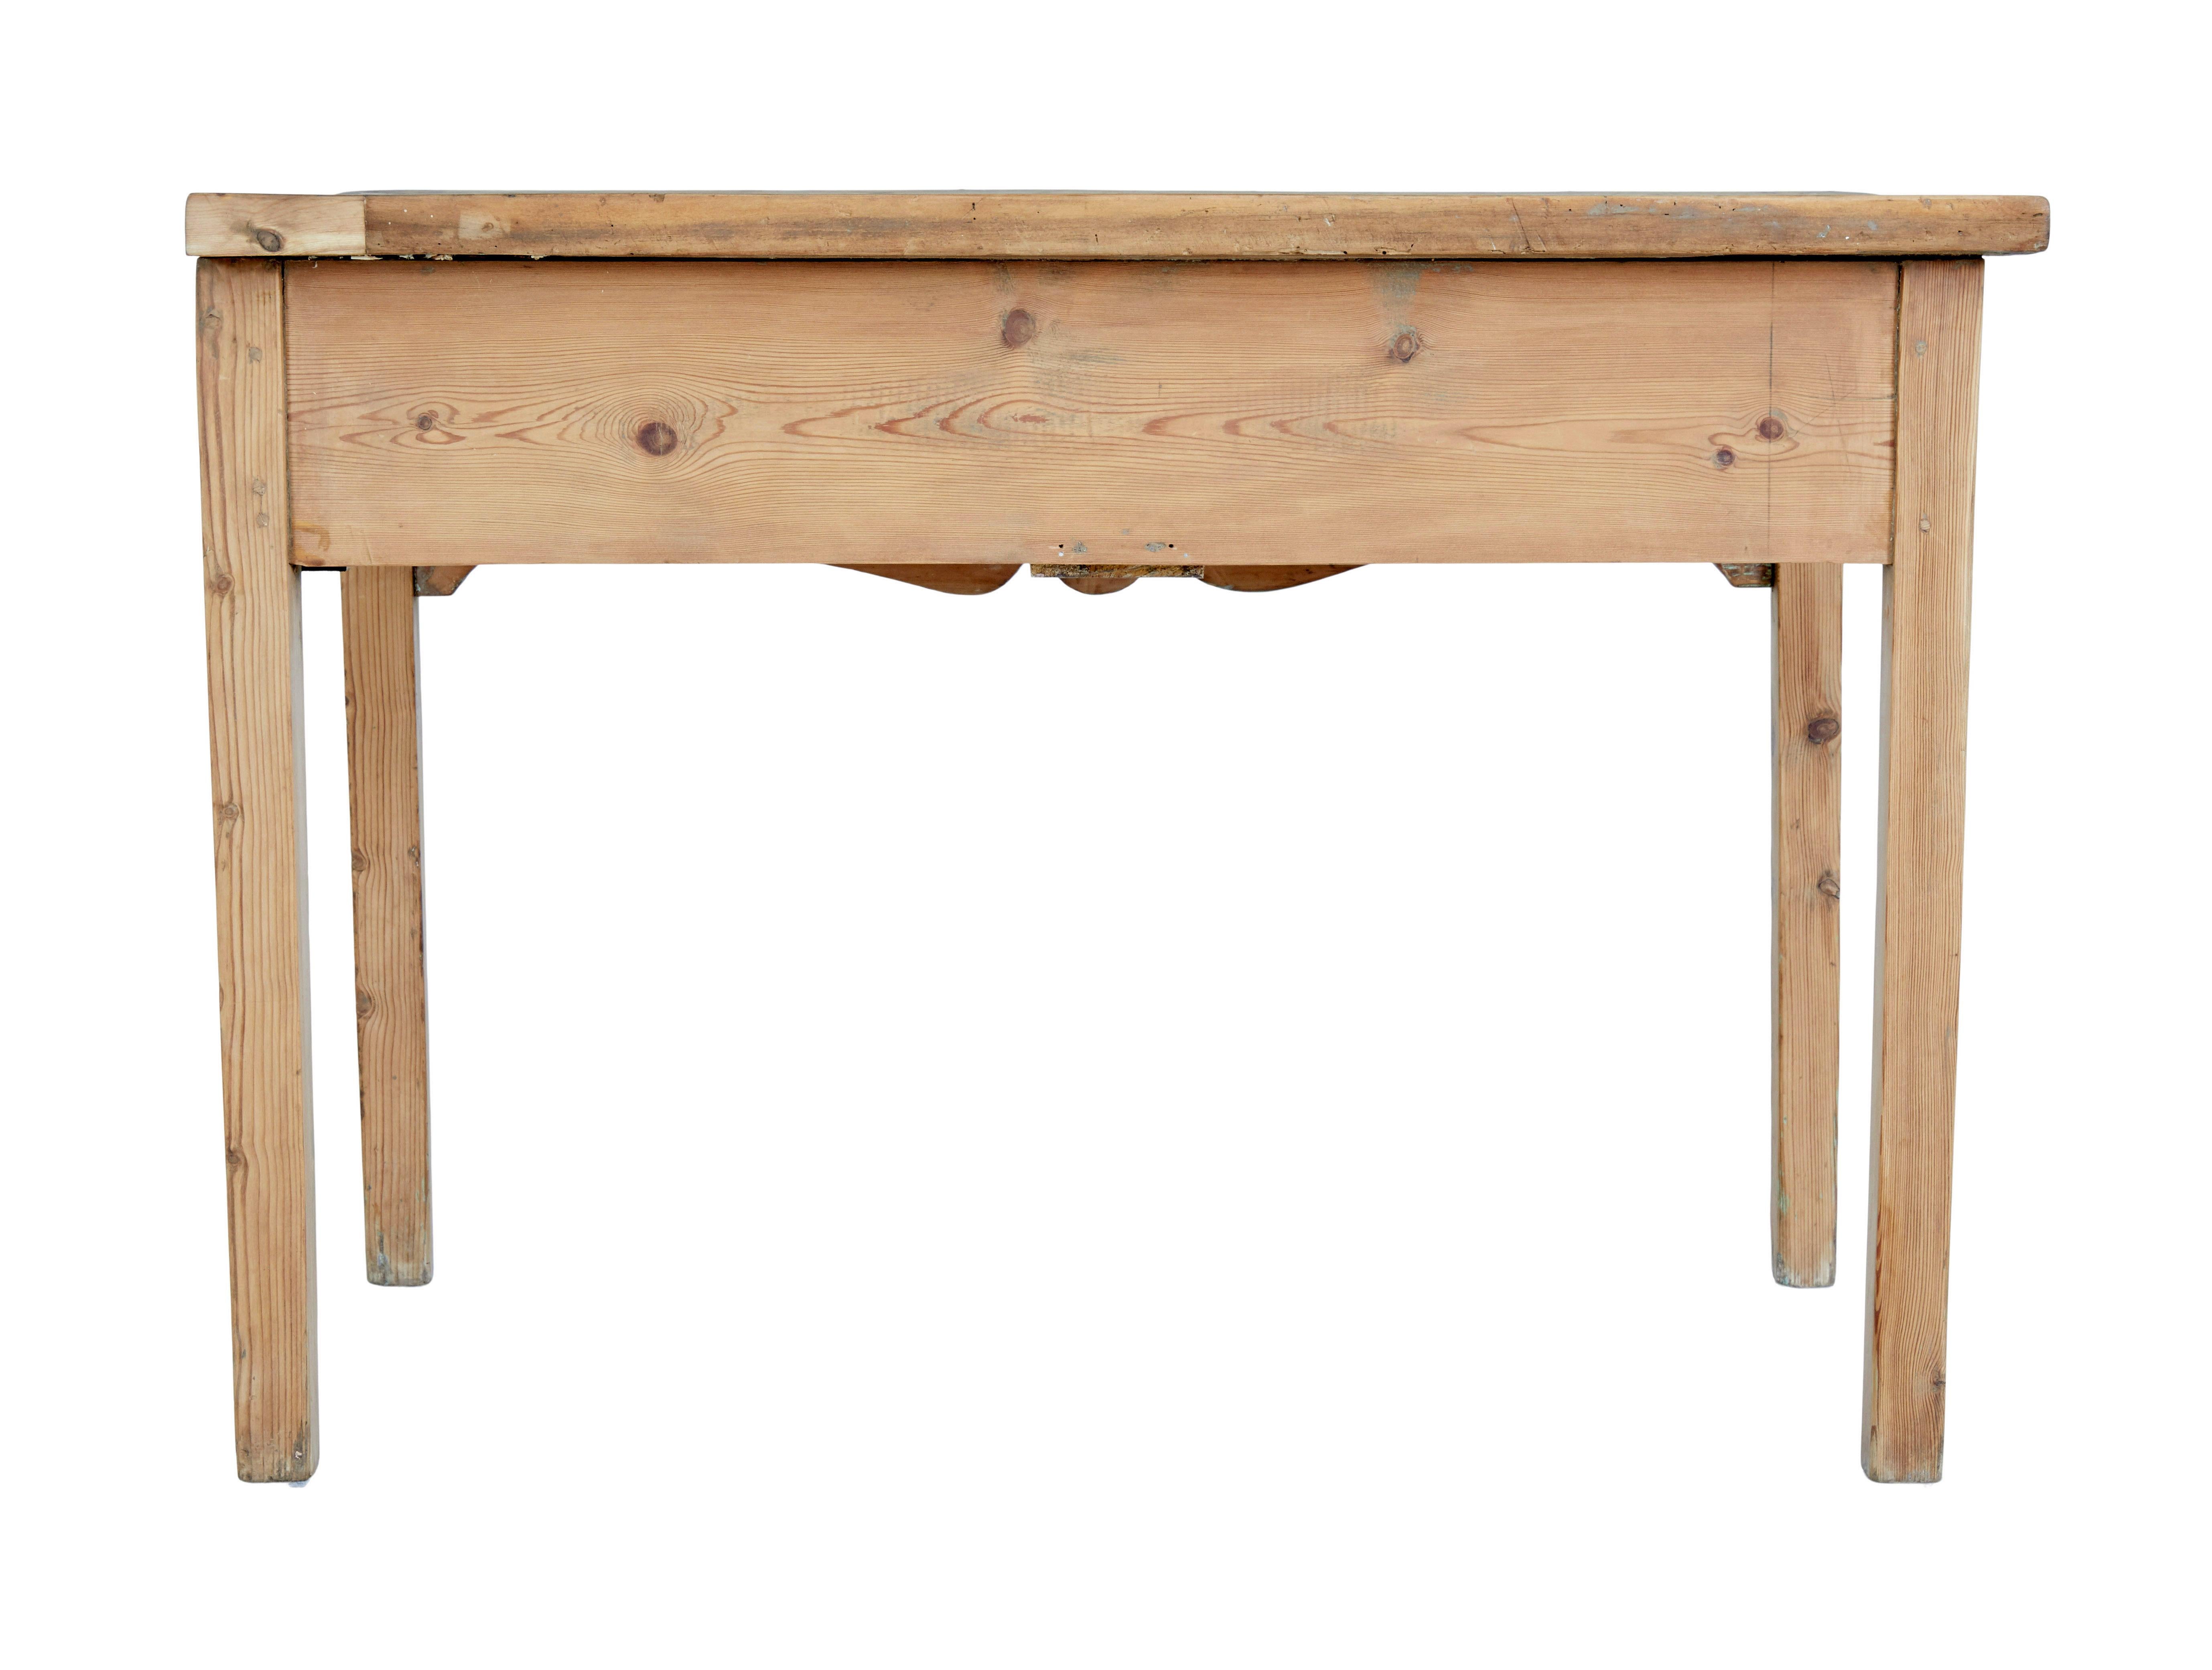 Rustic 19th century Victorian pine kitchen table For Sale 2